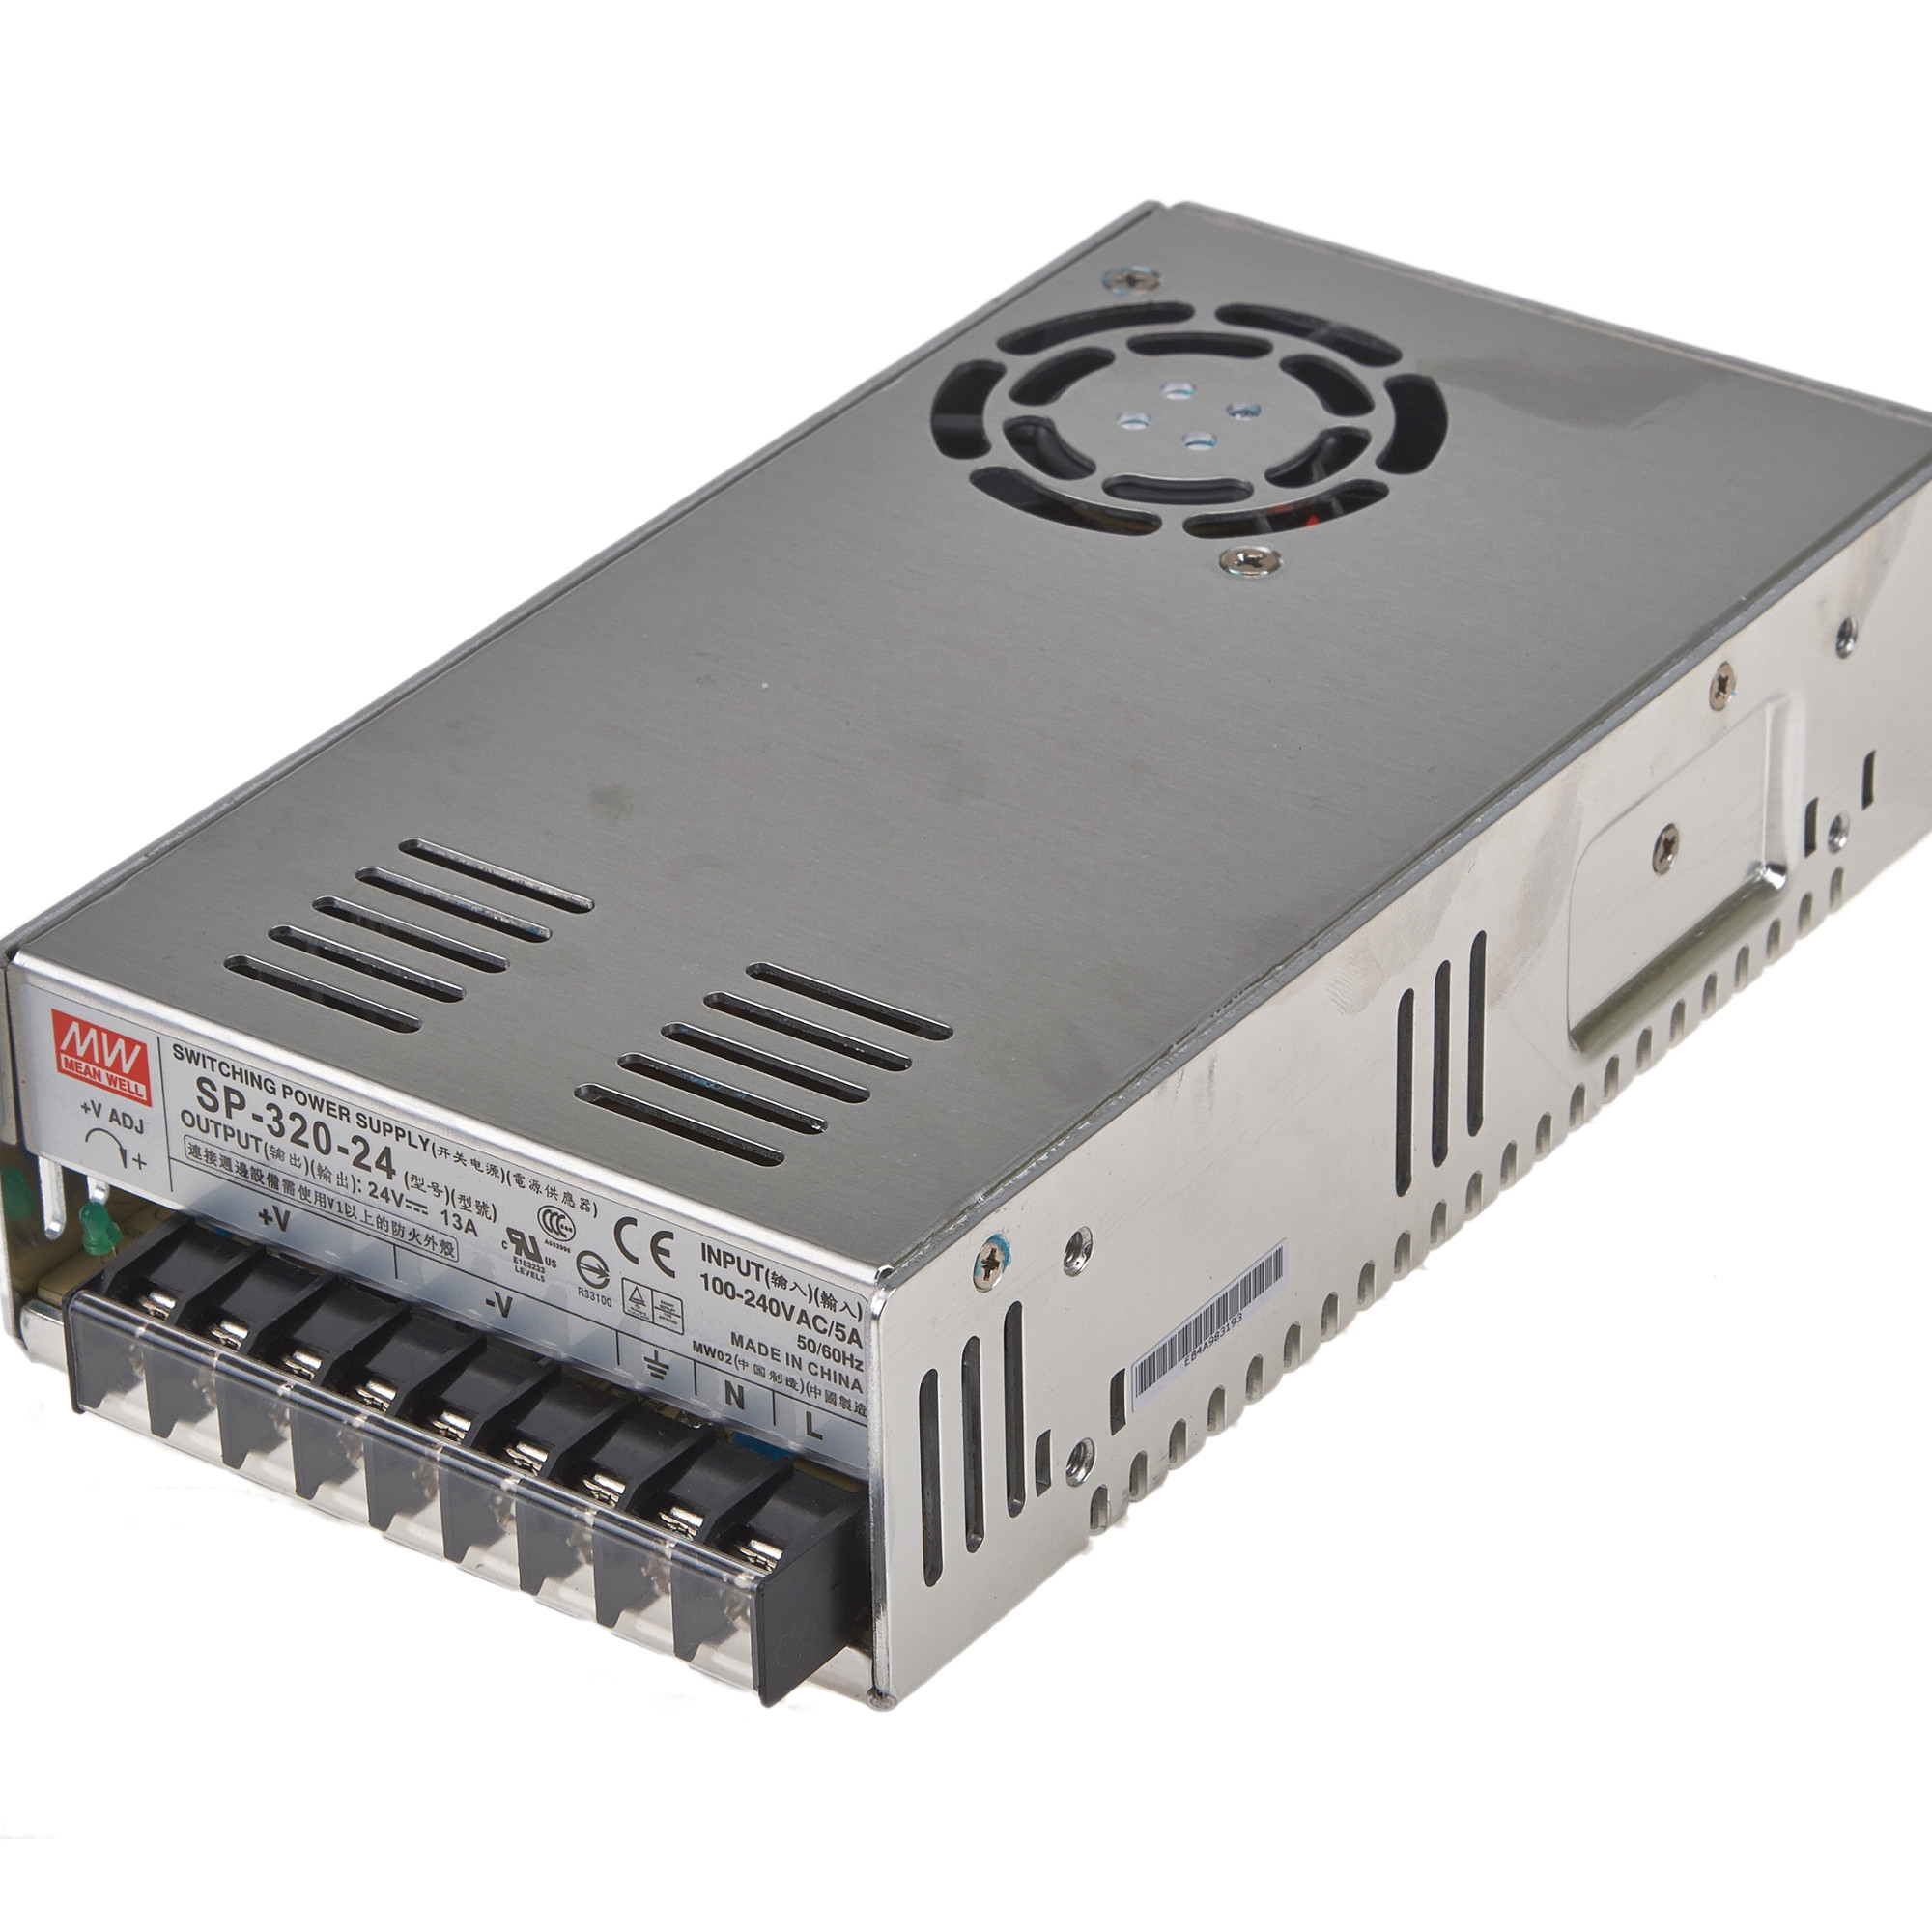 Power Supply Ac Dc 24v 20a - Rezfoods - Resep Masakan Indonesia